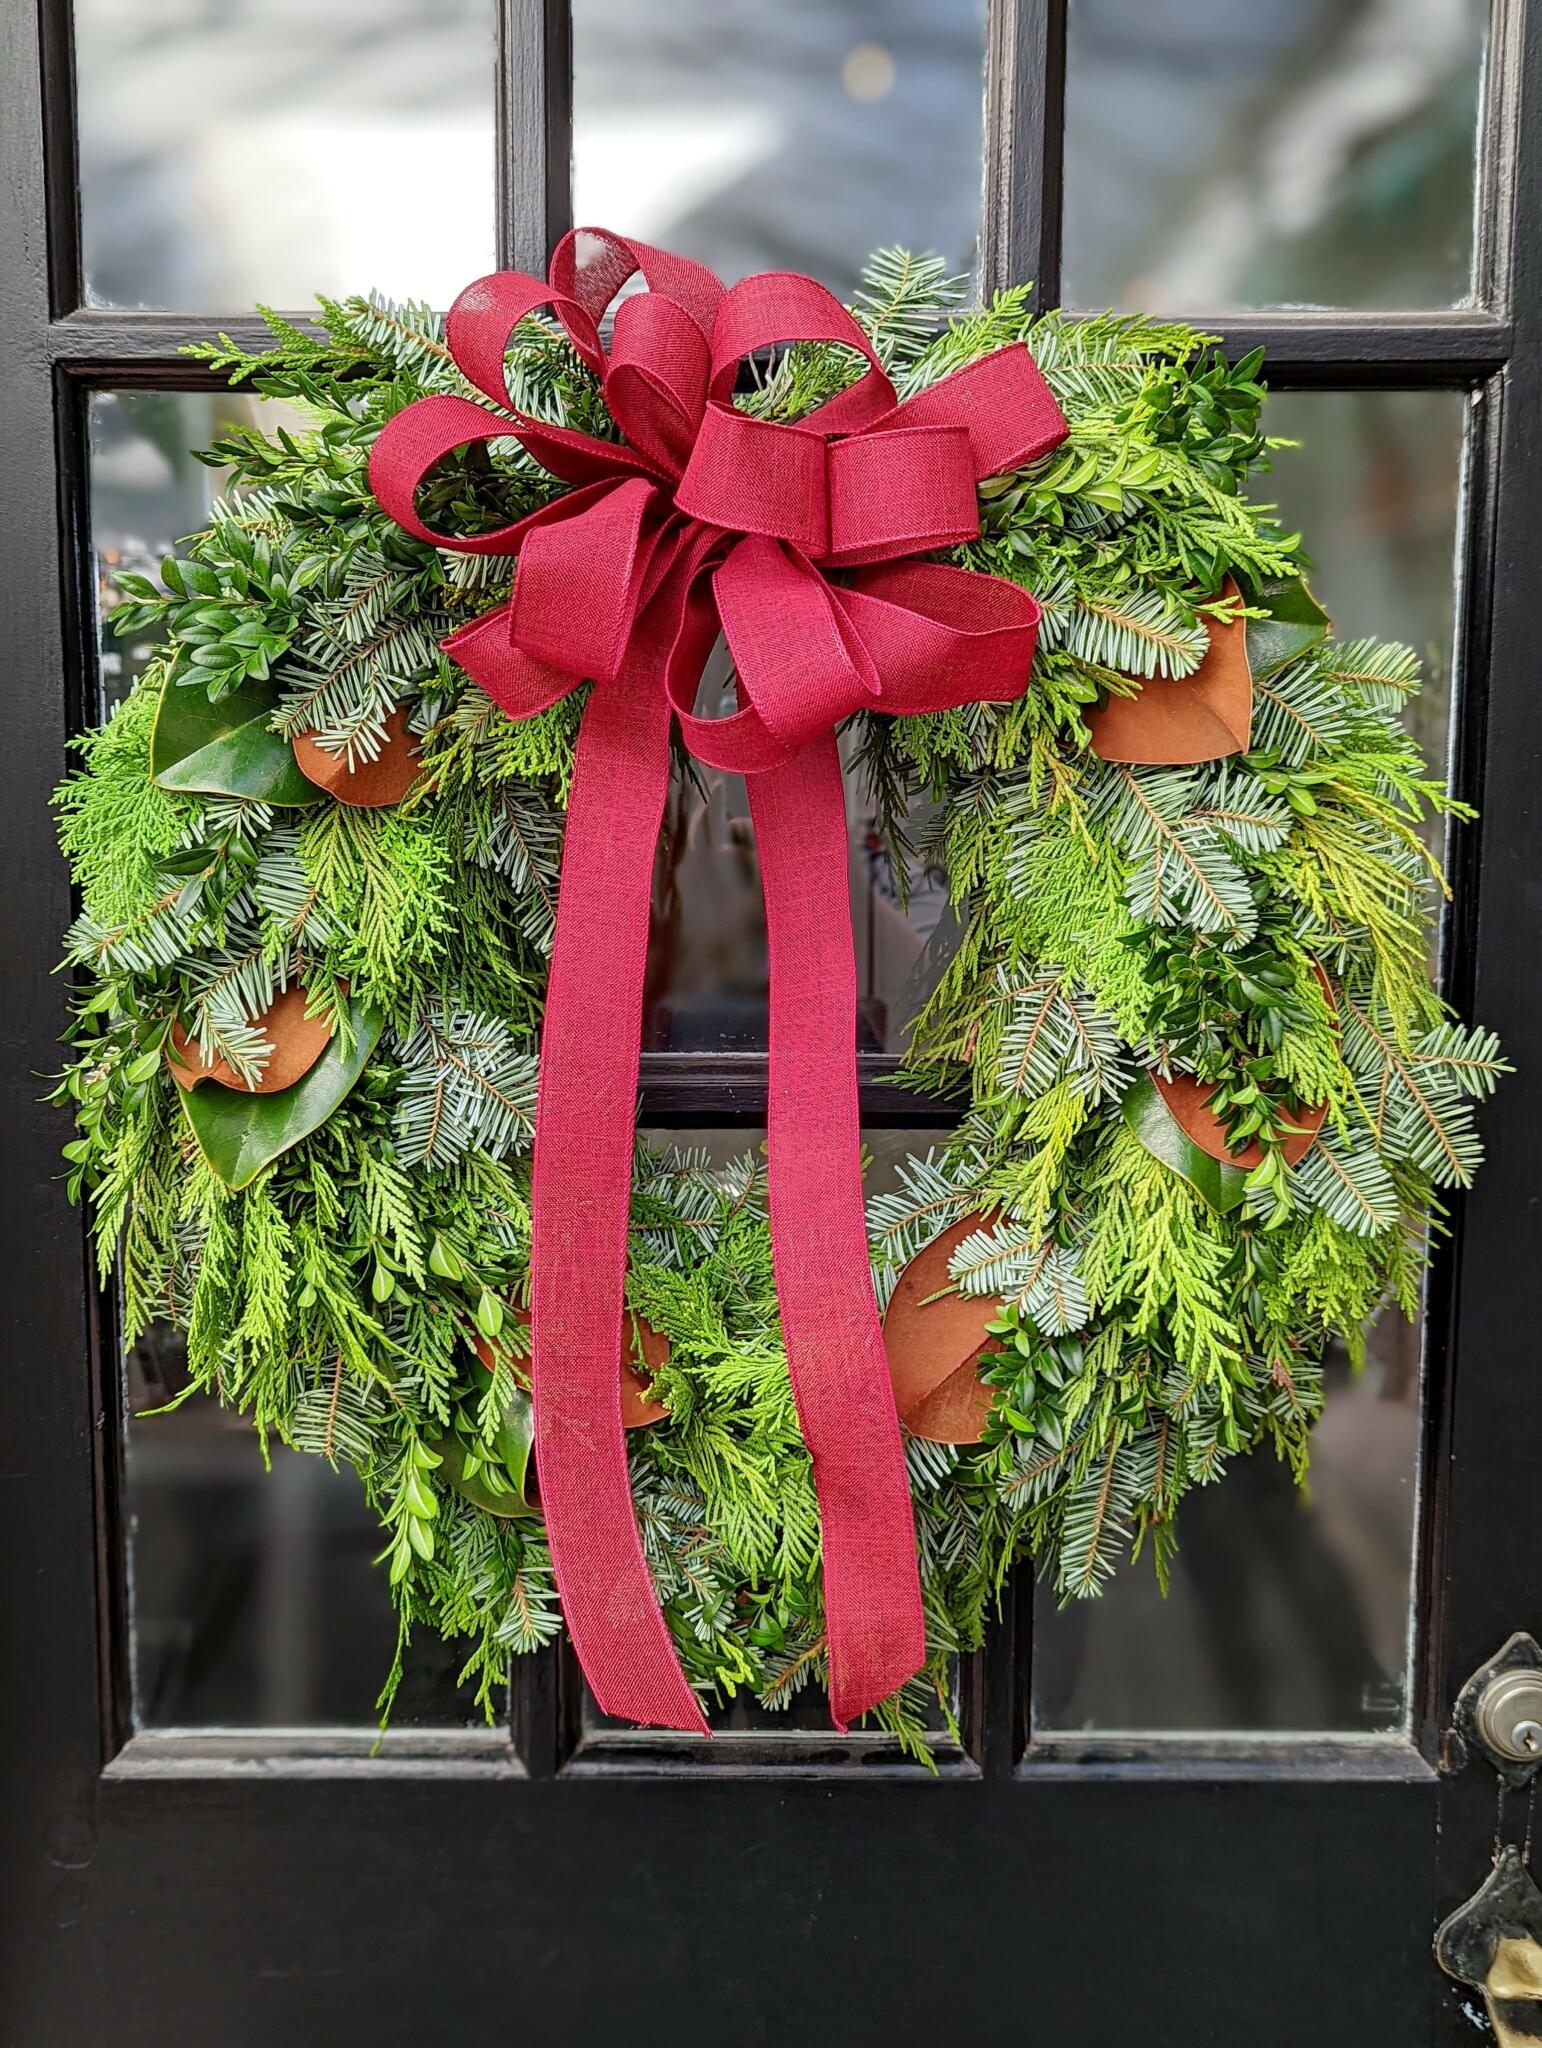 The Watering Can | A wreath made of winter greens and magnolia finished with a large red bow.